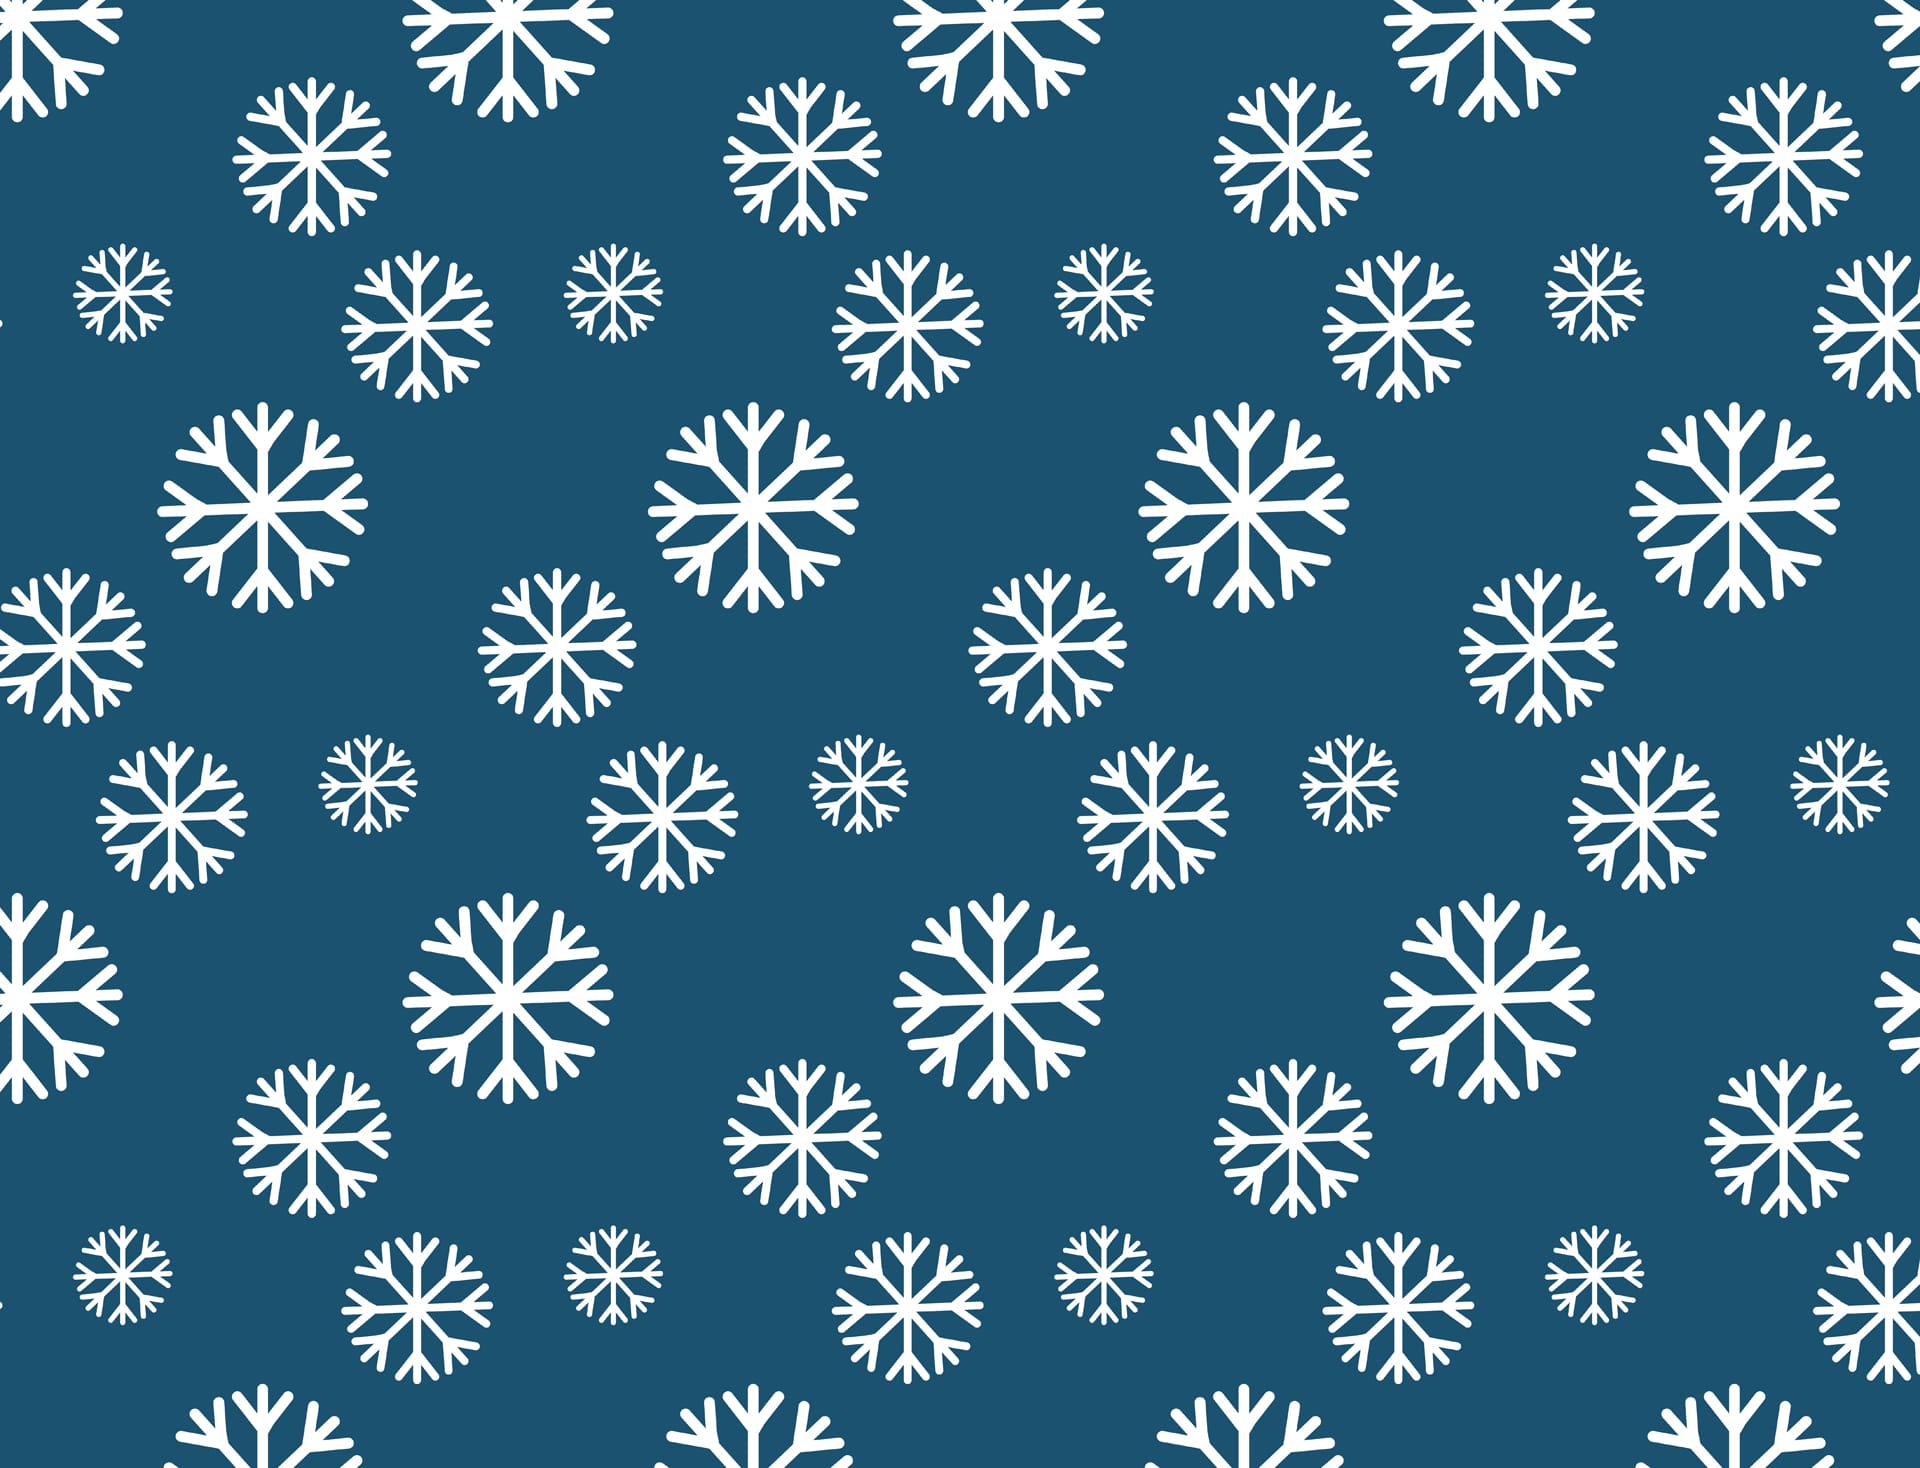 Pattern with white snowflakes blue background